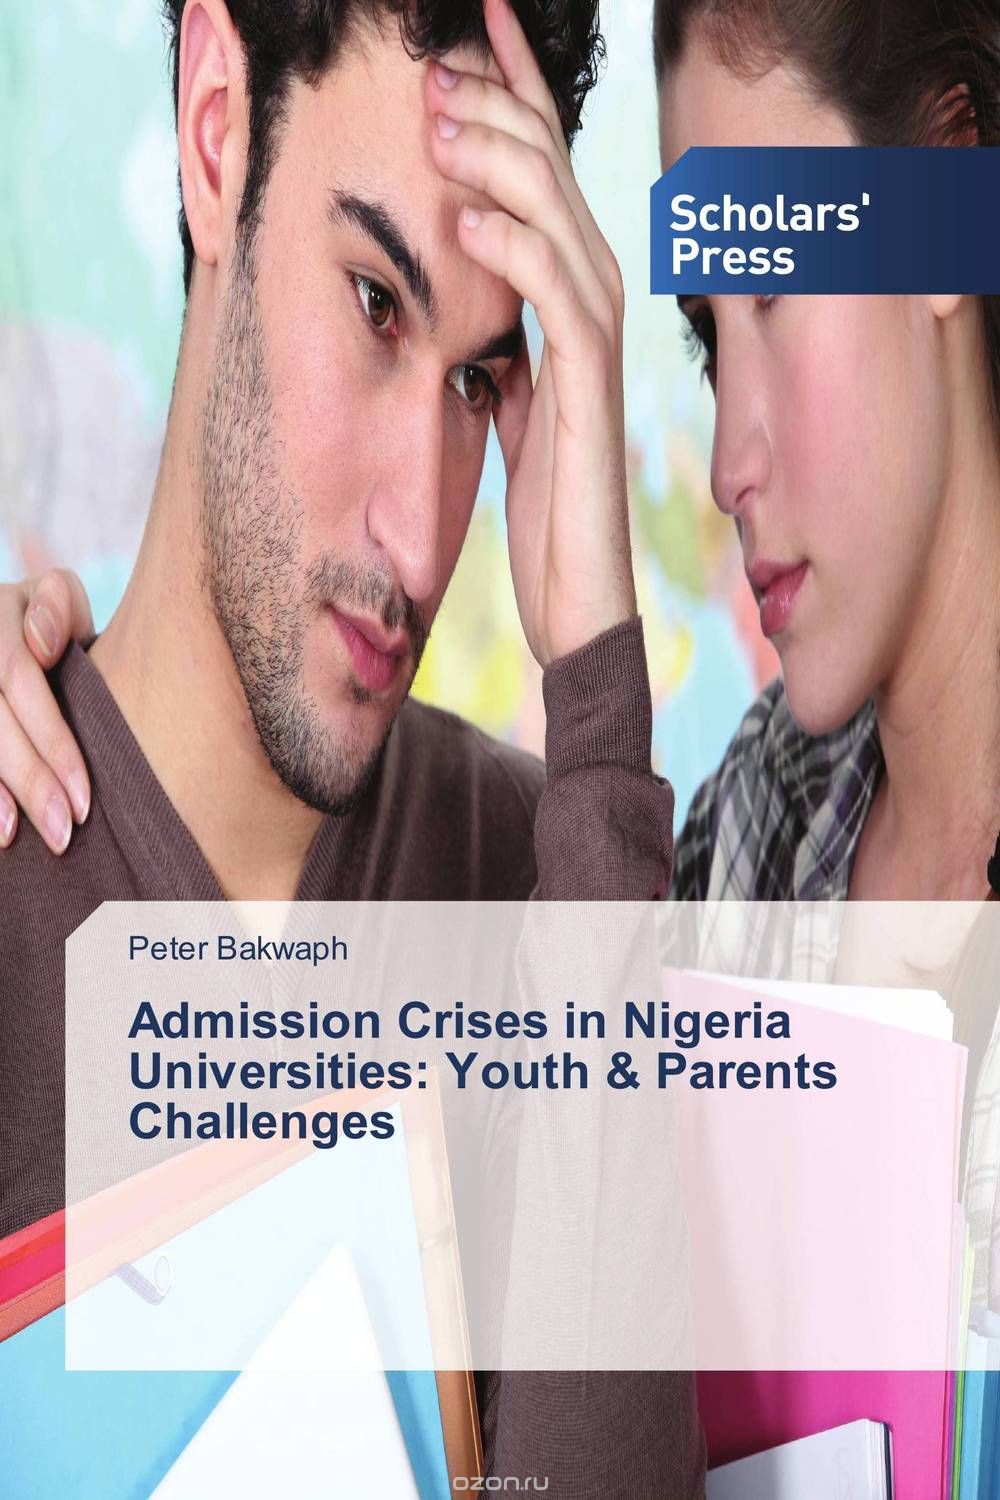 Admission Crises in Nigeria Universities: Youth & Parents Challenges